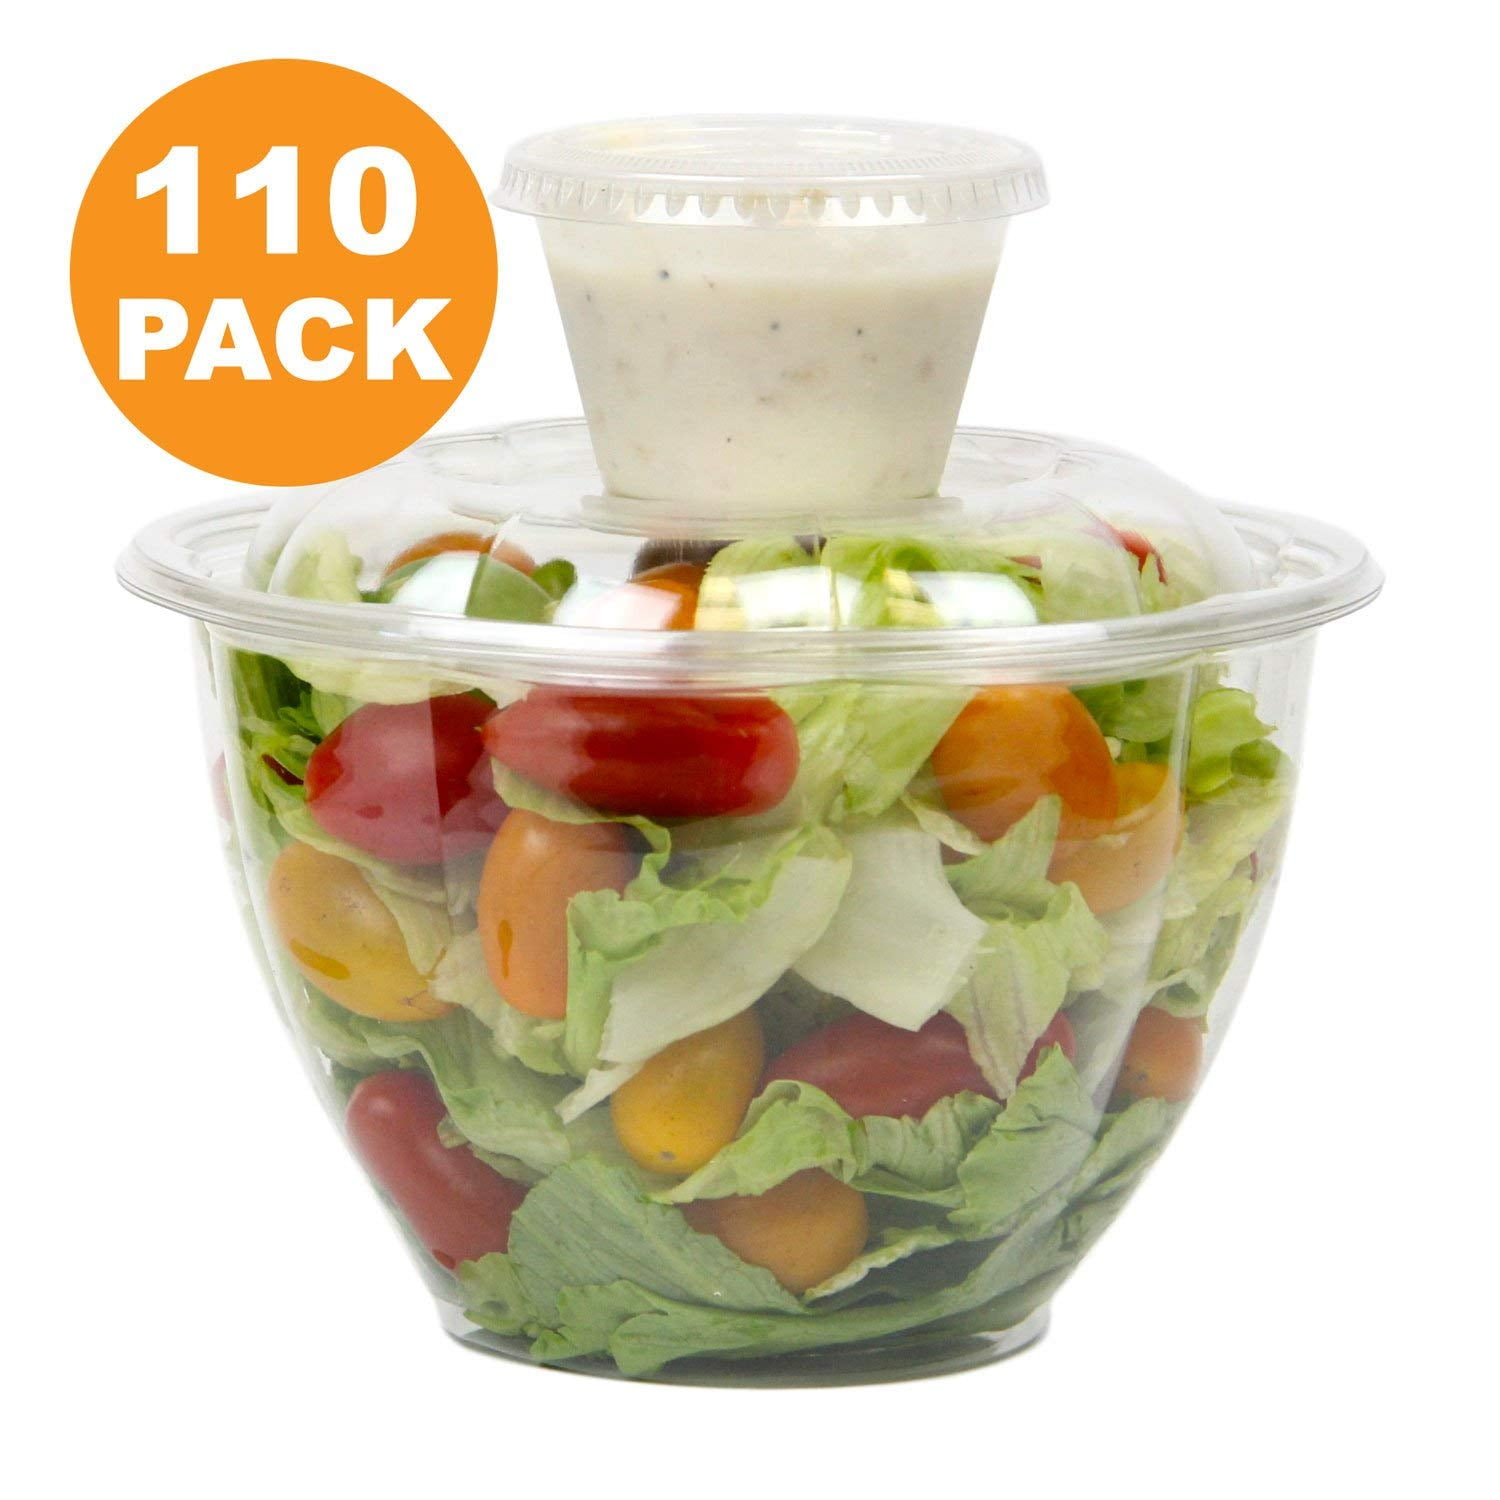 50 x Plastic Bowls with Handles Salad Soup Cereal Fruit 